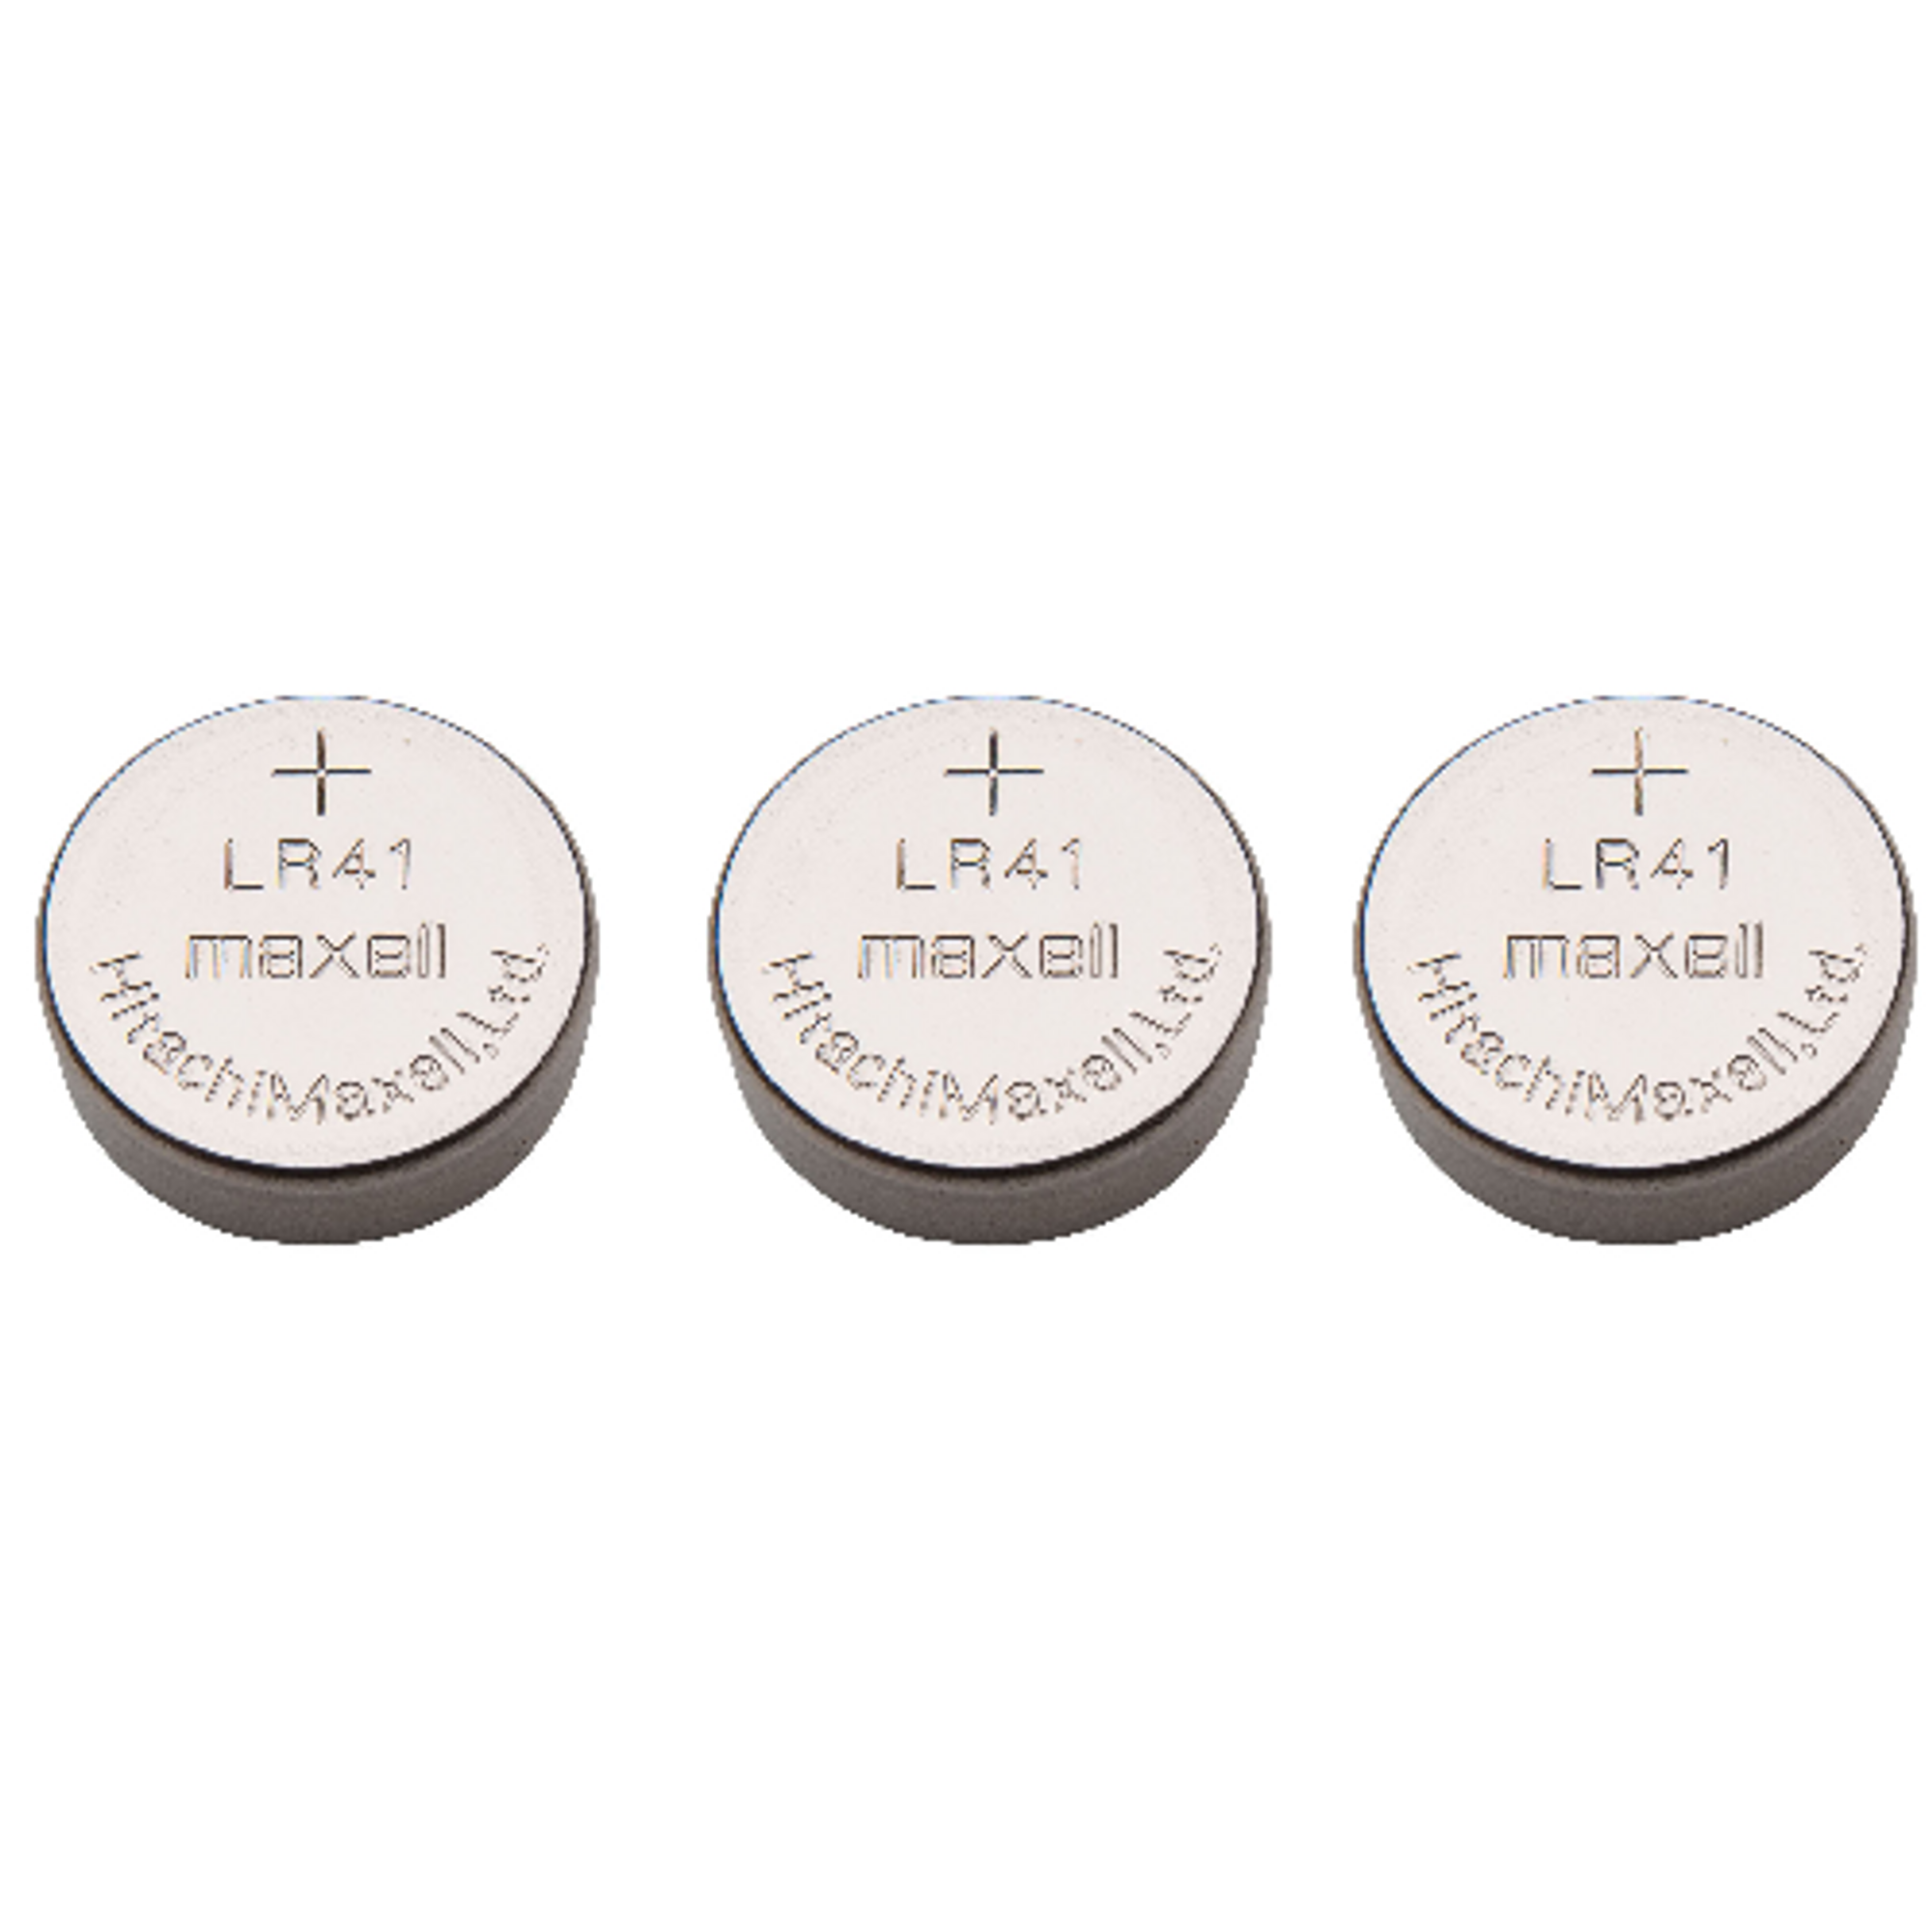 Lr41 Replacement Batteries (3-pack)